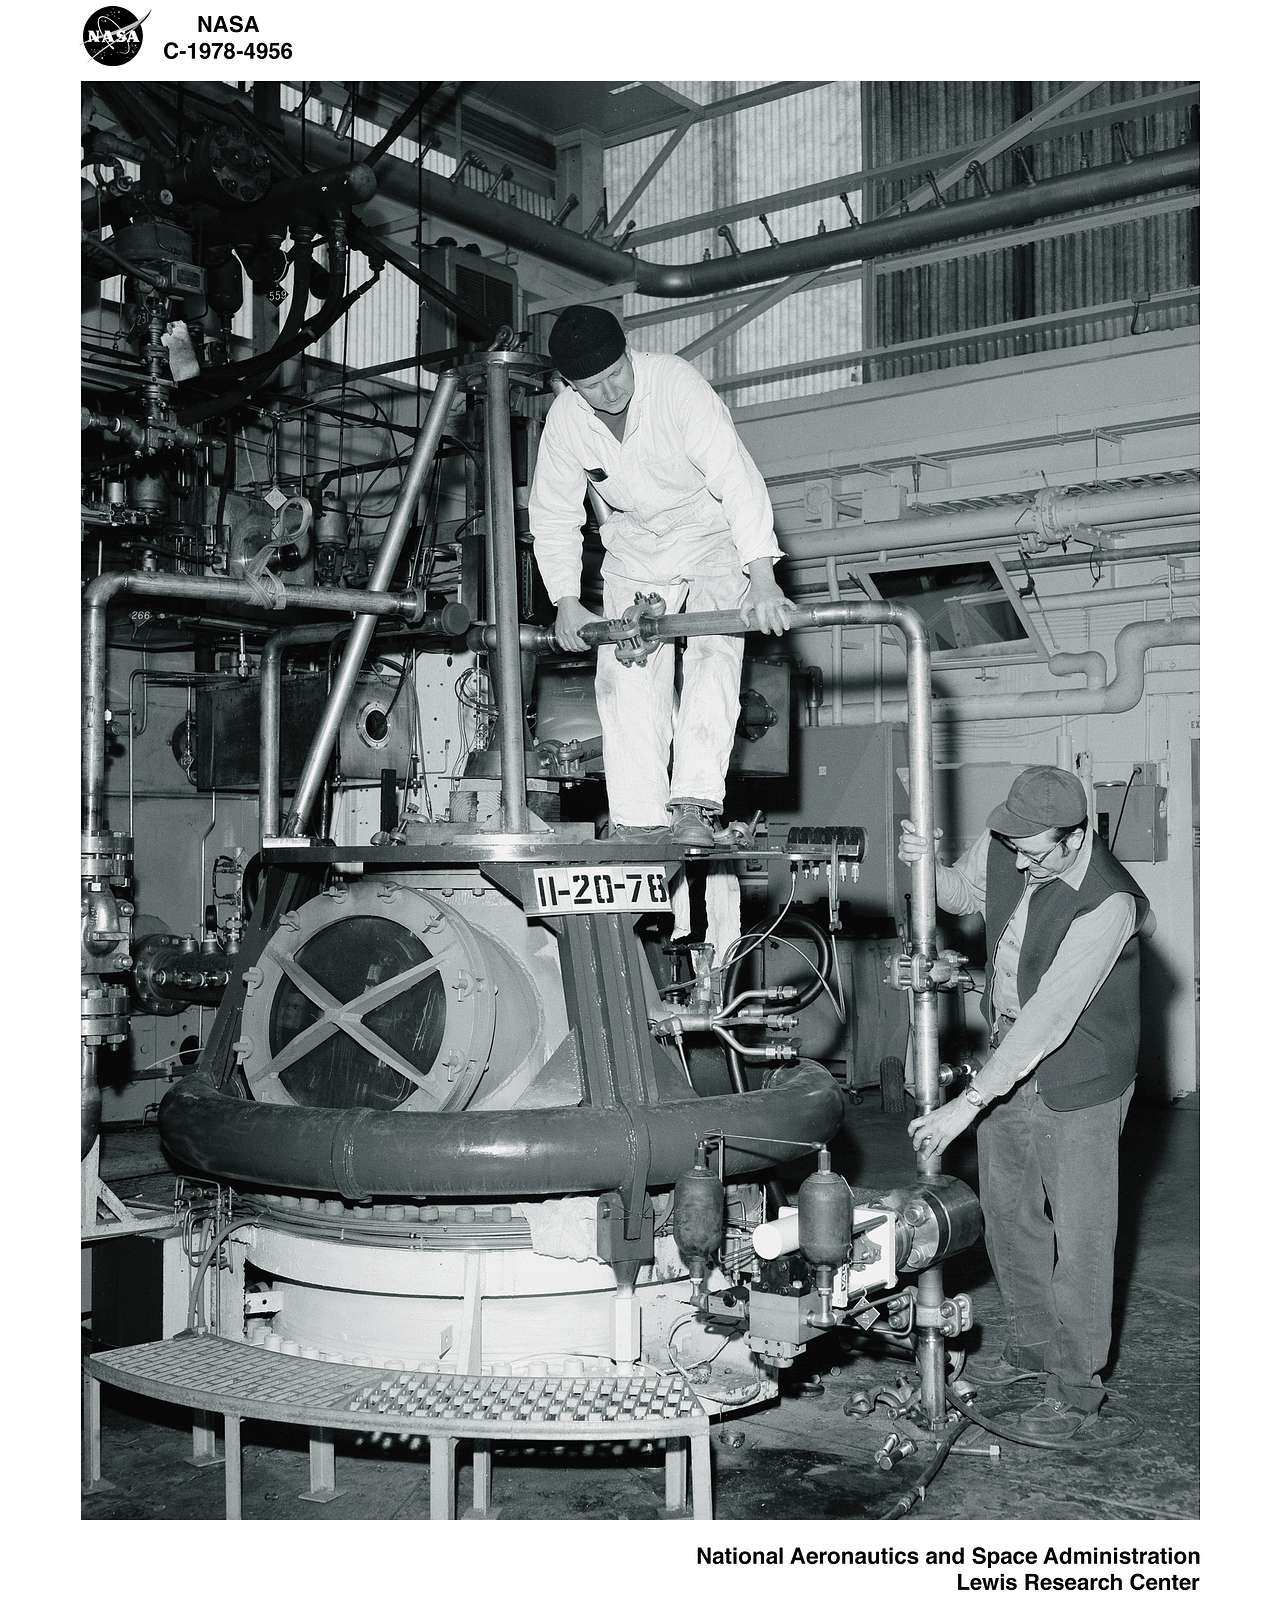 PIPEFITTERS IN THE ROCKET ENGINE TEST FACILITY RETF INSTALLING HIGH PRESSURE ROCKET PIPING ON